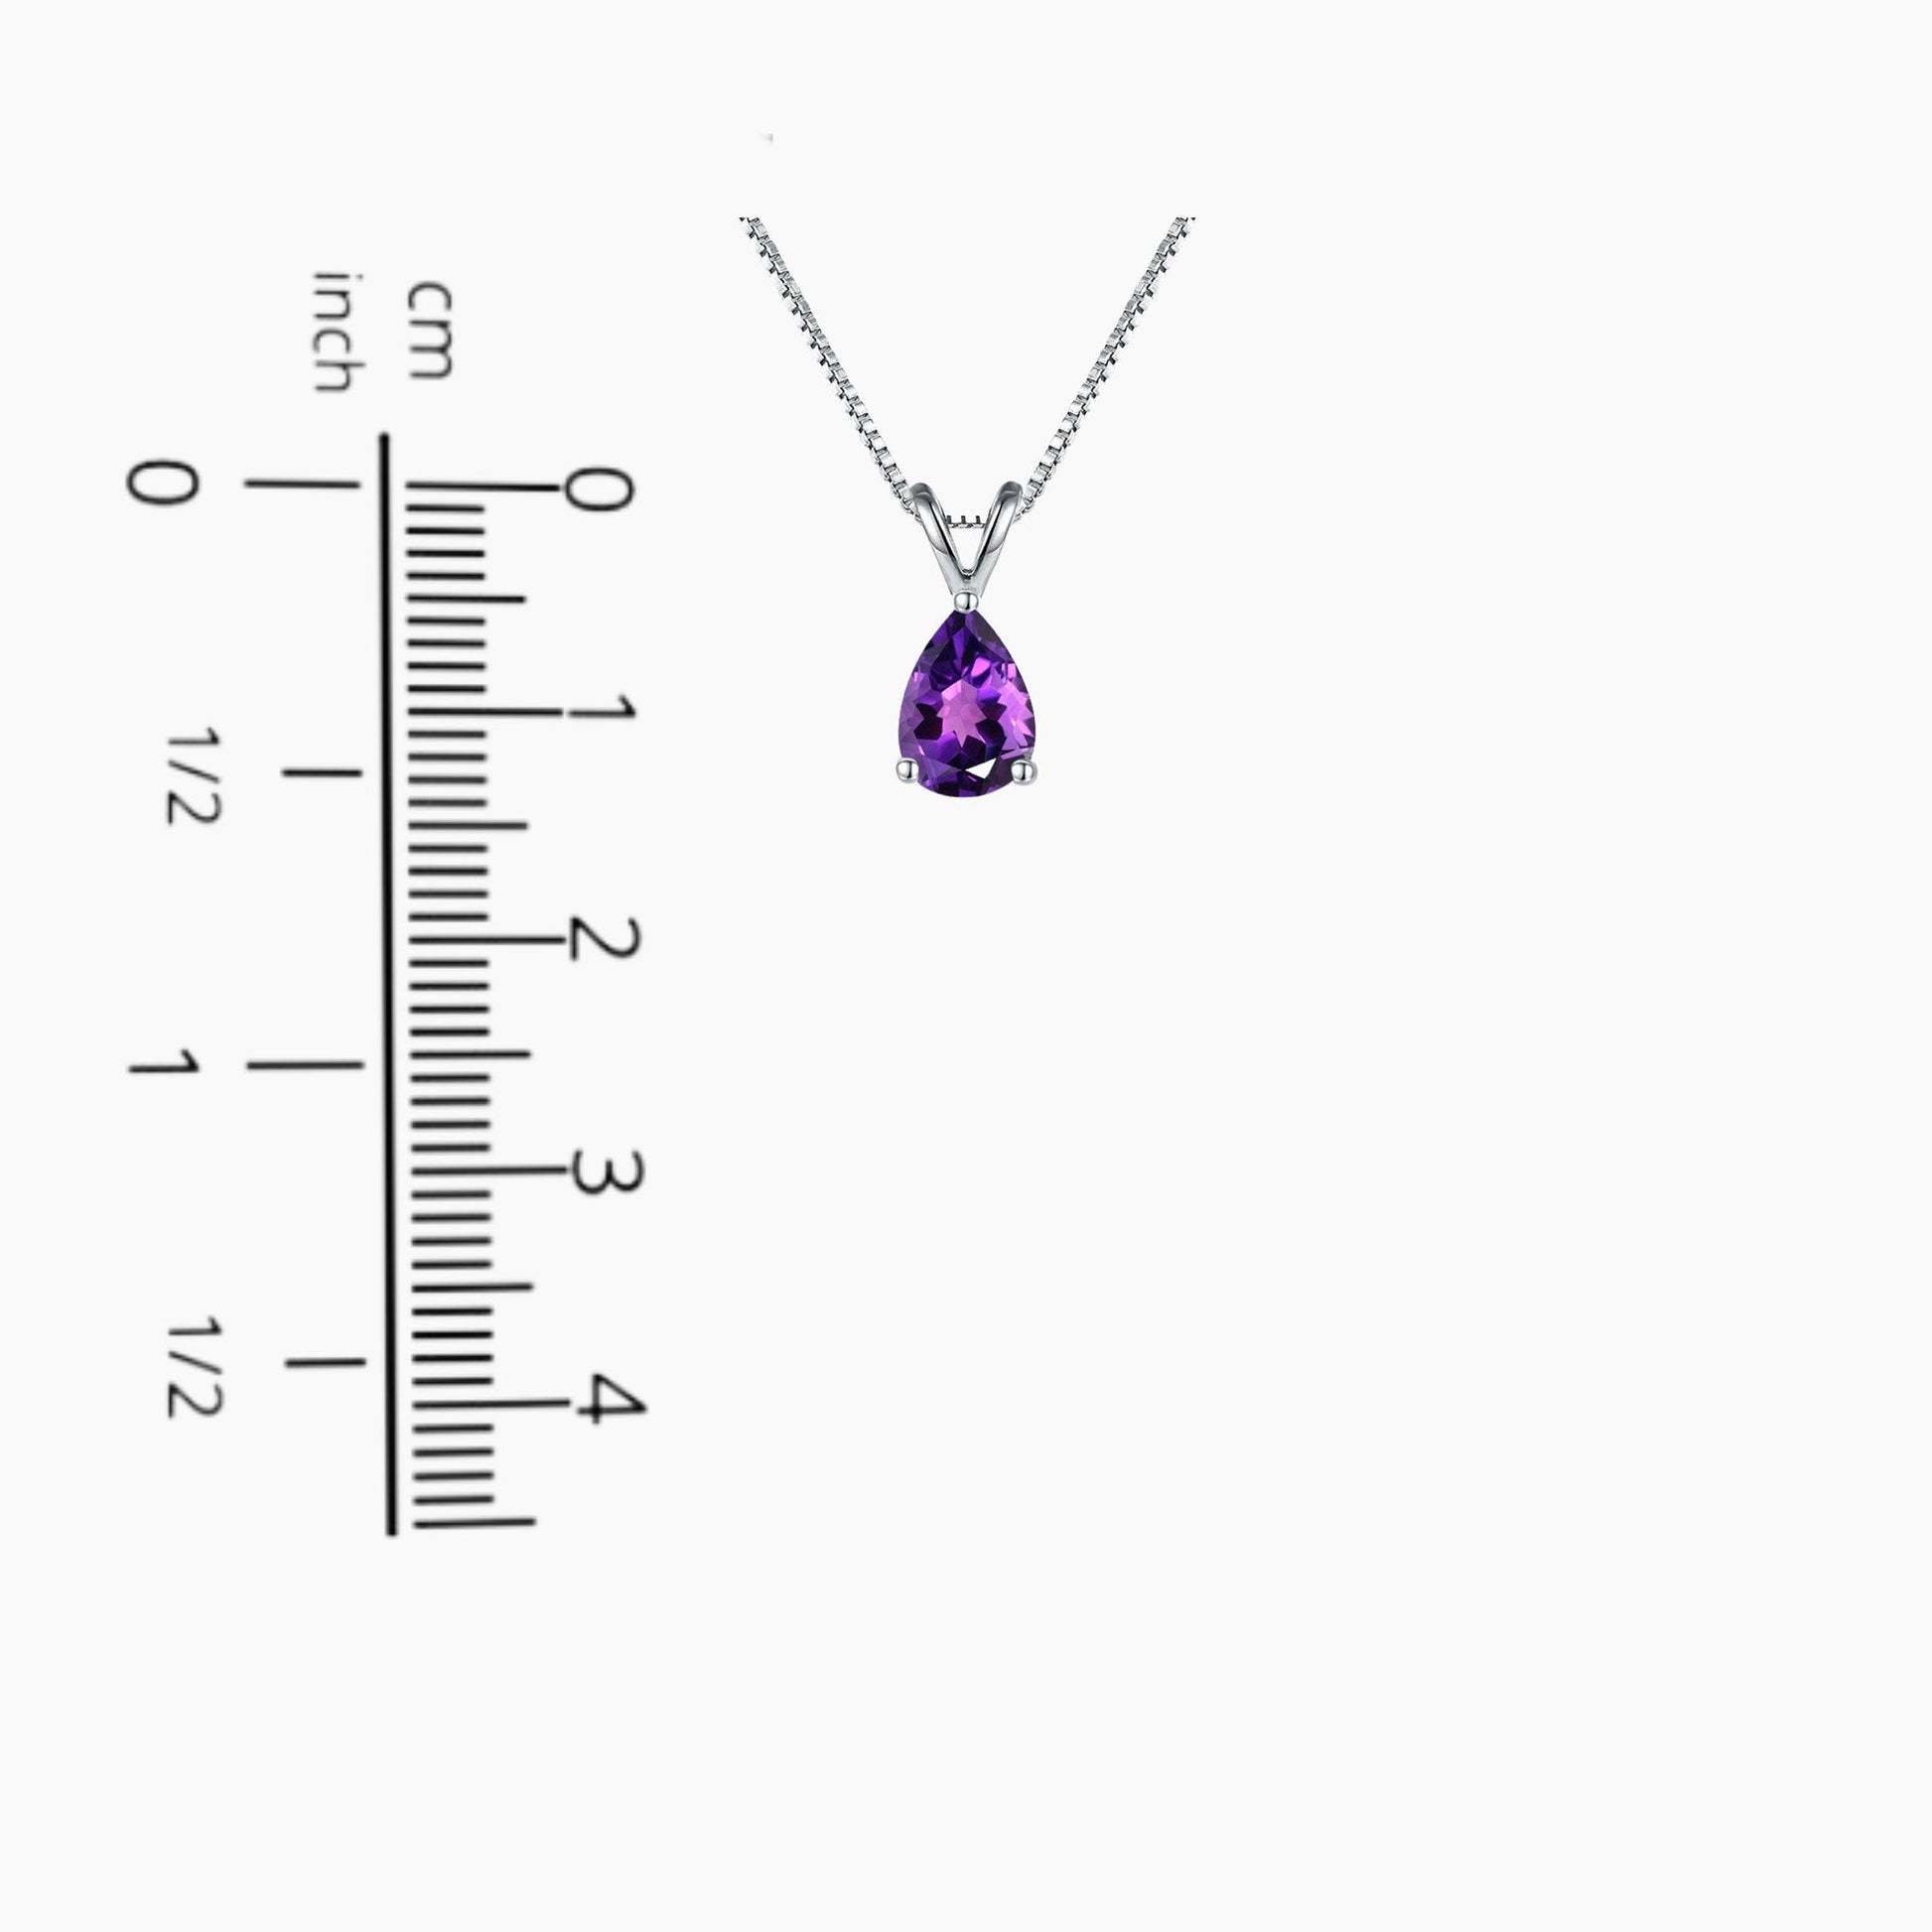 Pear Amethyst Pendant displayed on a scale to accurately represent its size and dimensions.